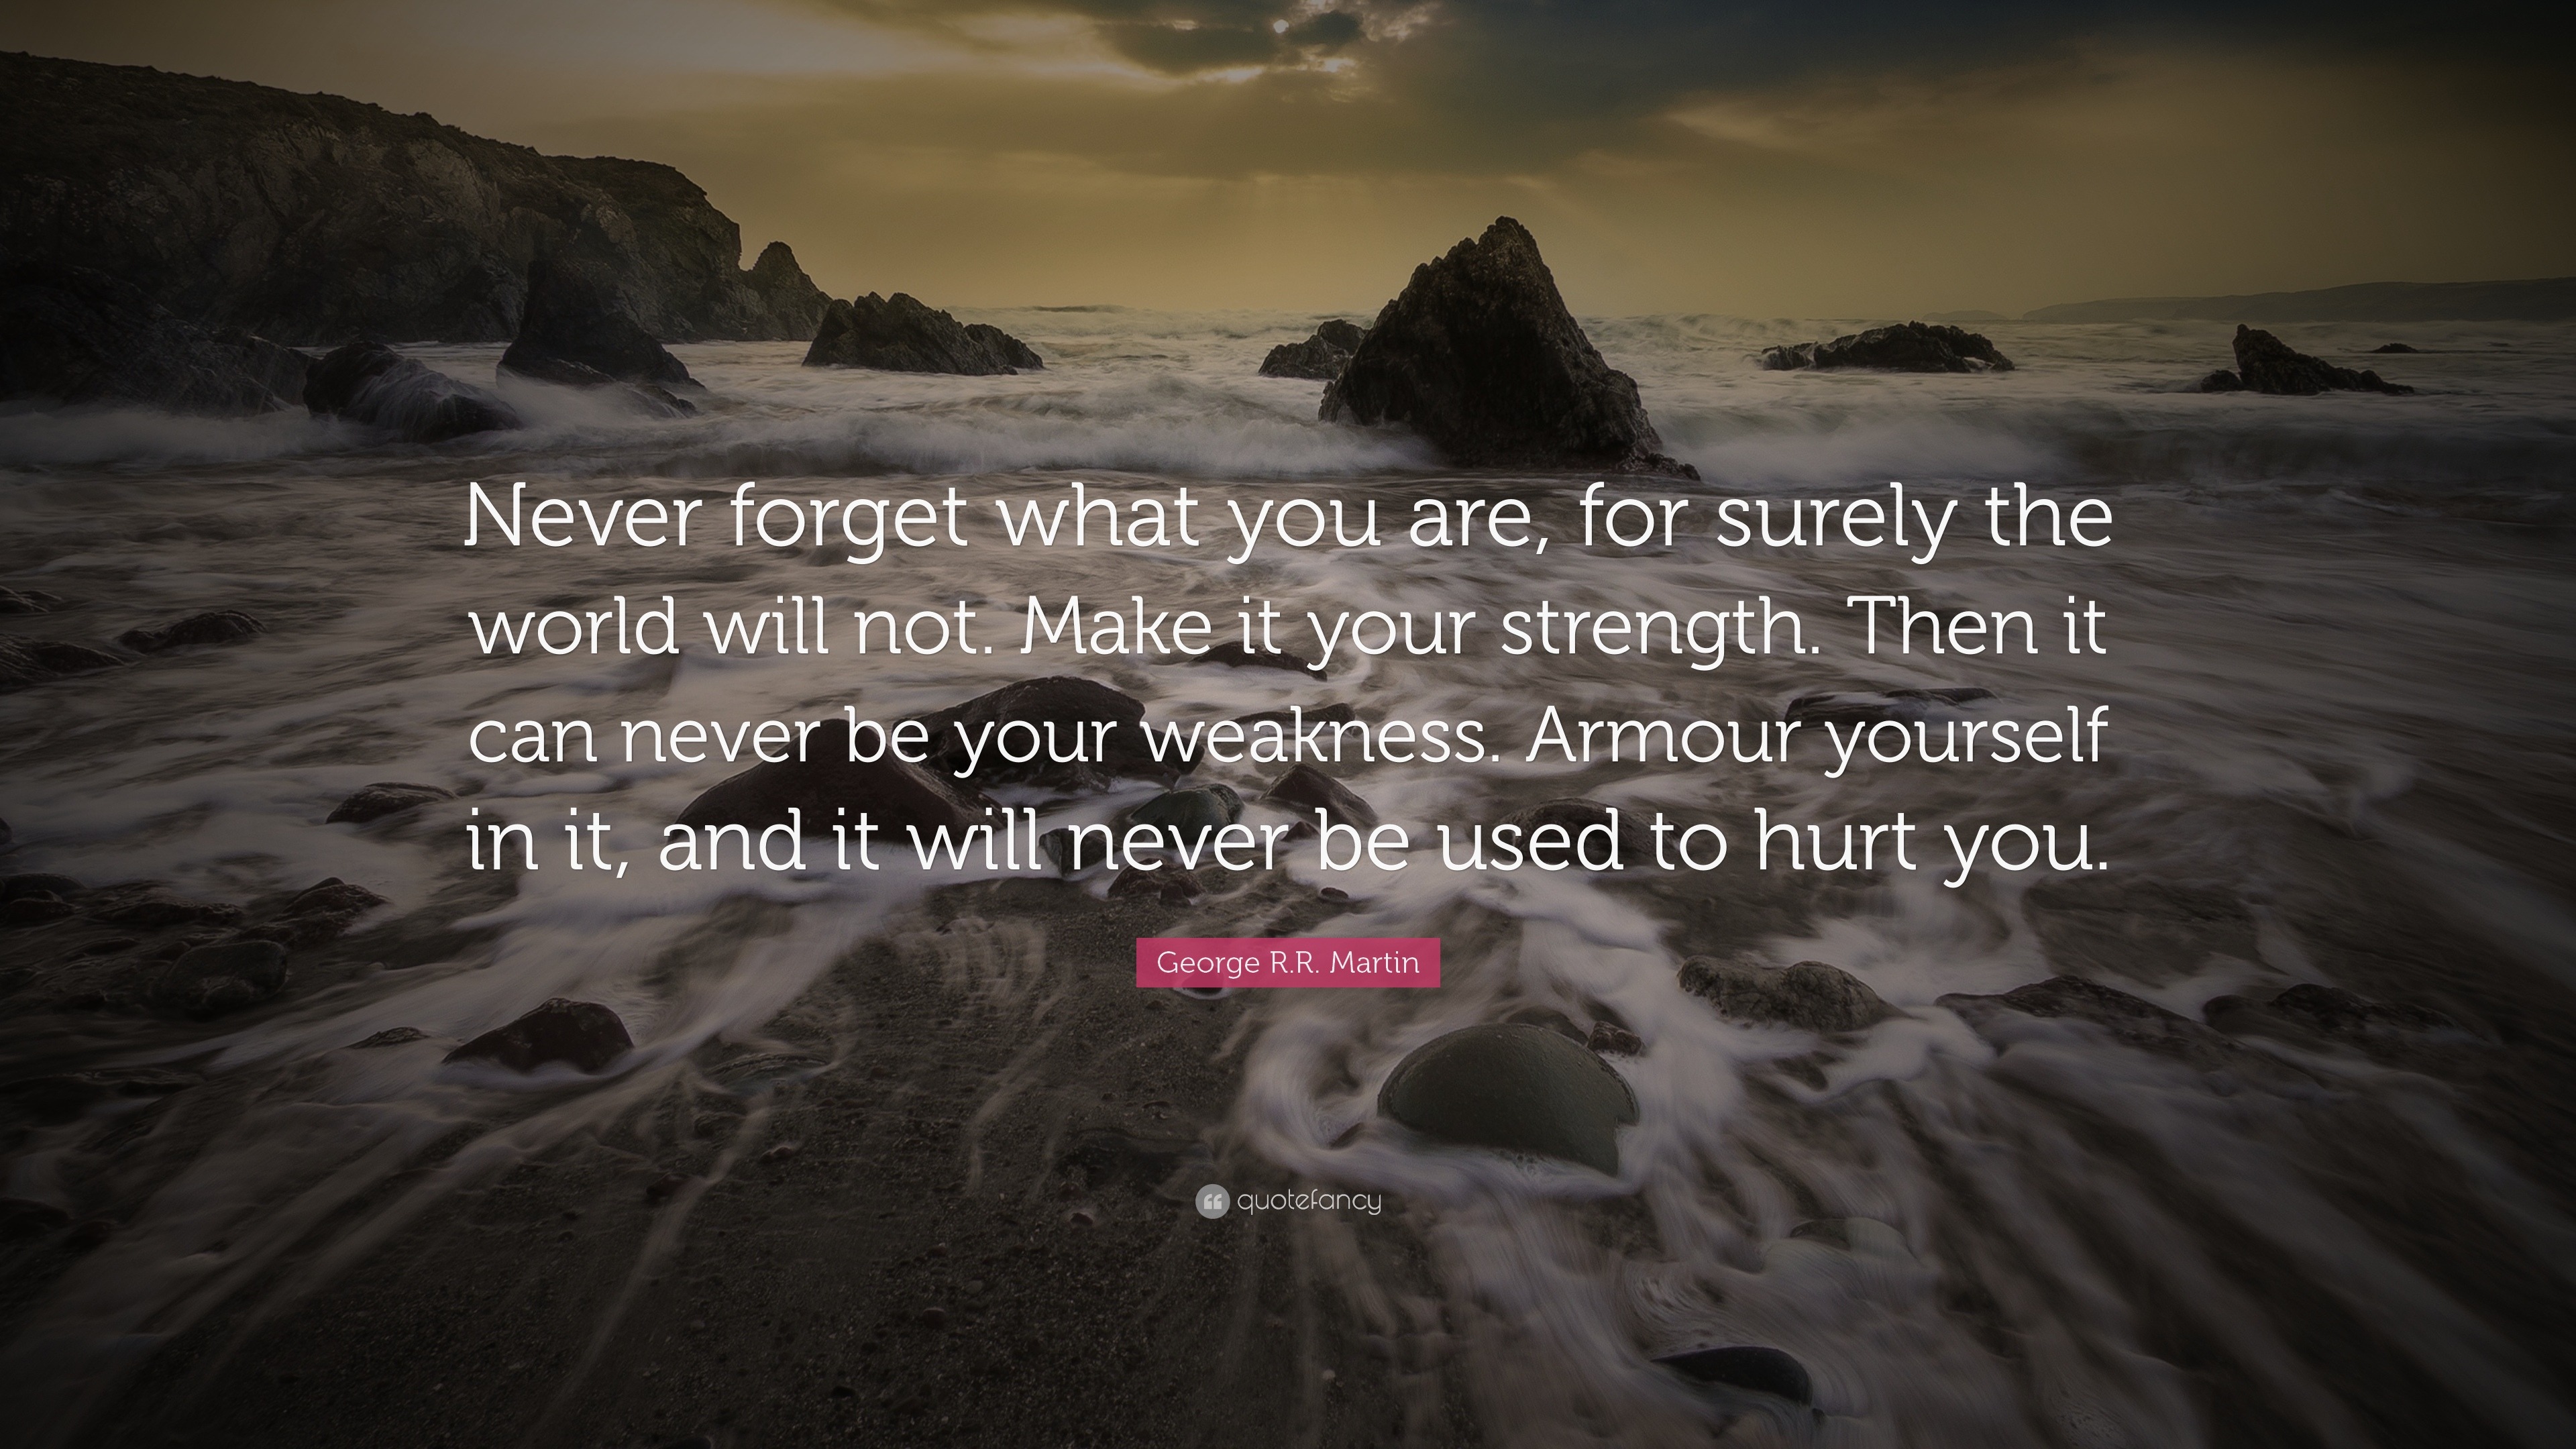 George R.R. Martin Quote: “Never forget what you are, for surely the